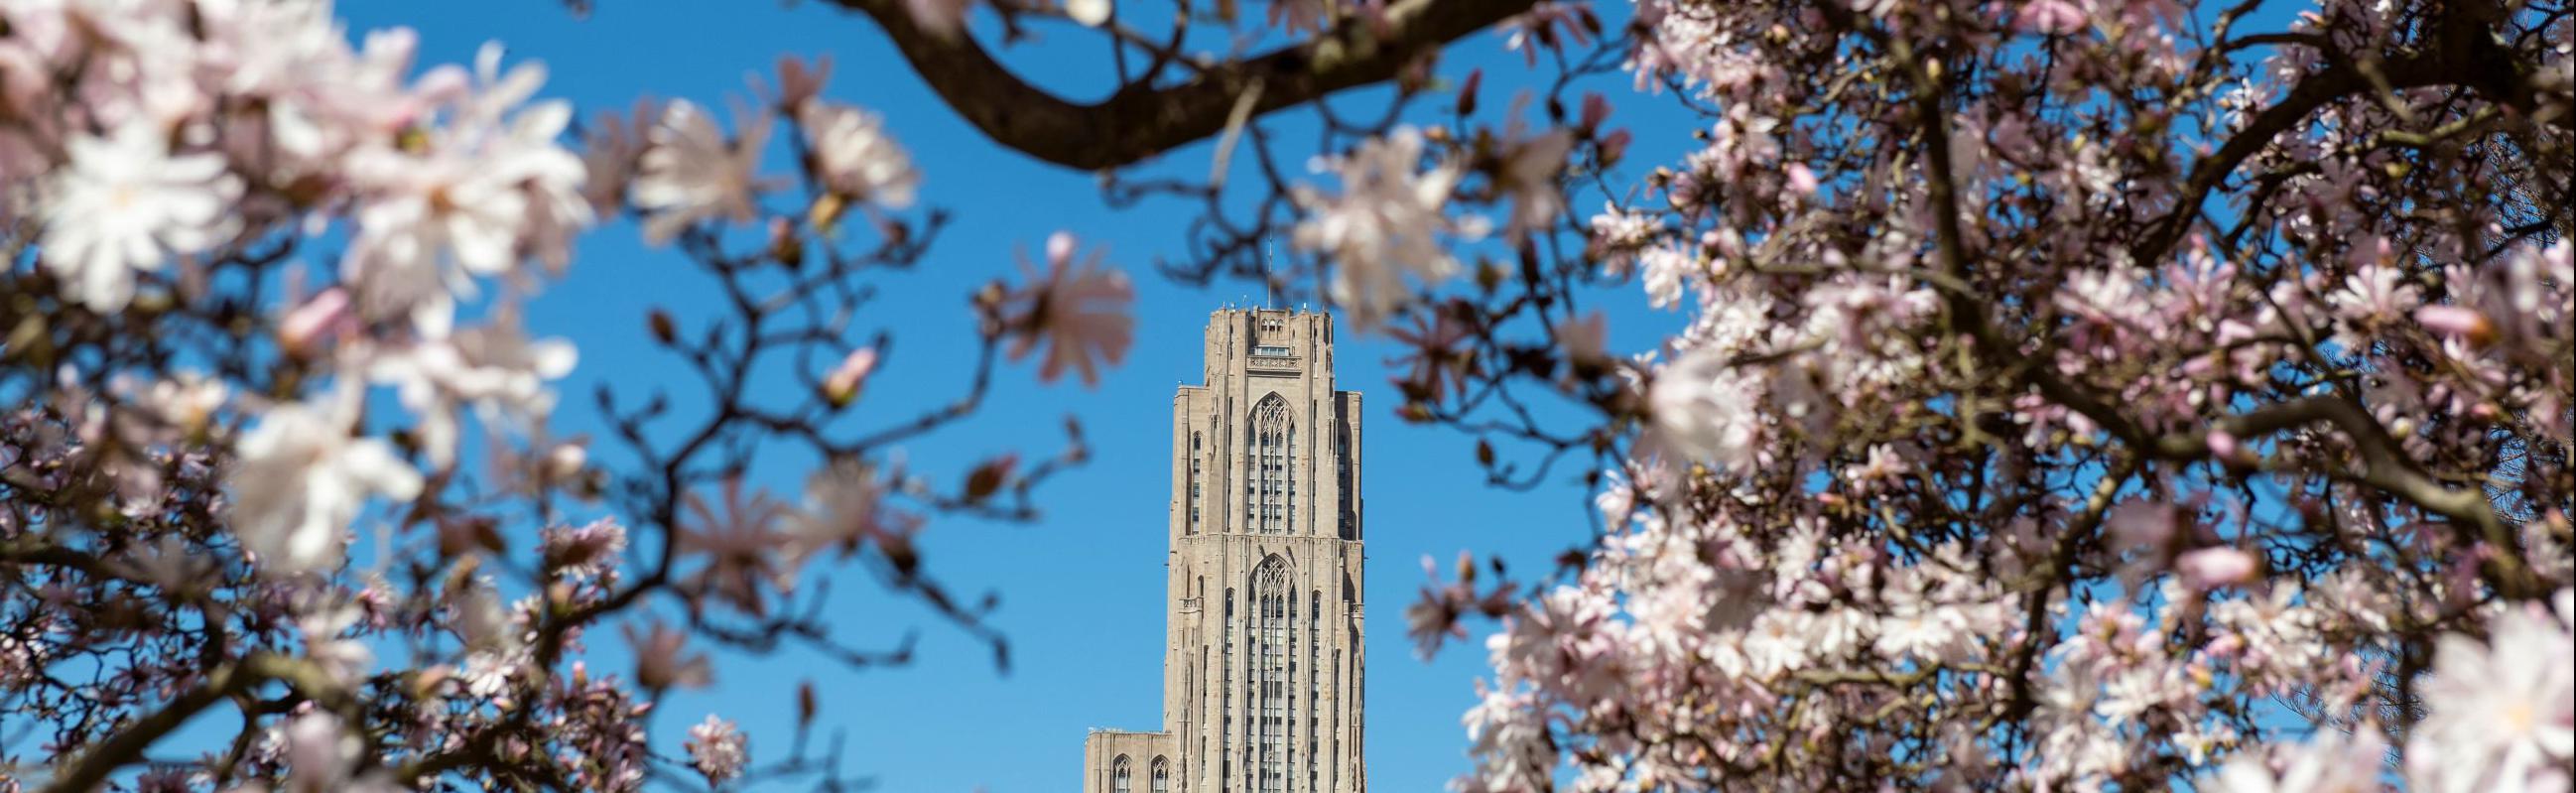 Image of Cathedral of Learning in spring